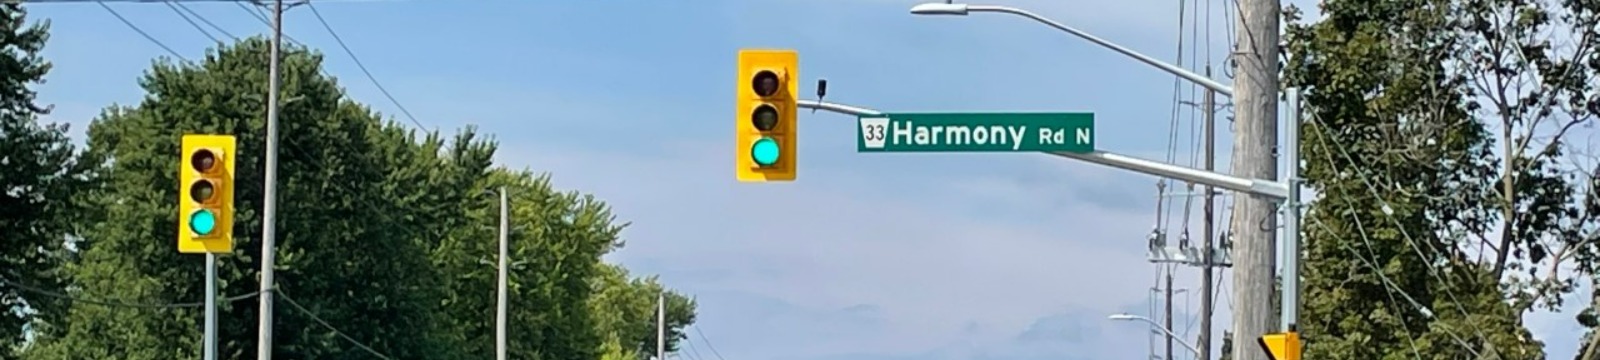 Regional Road sign at Harmony Rd.